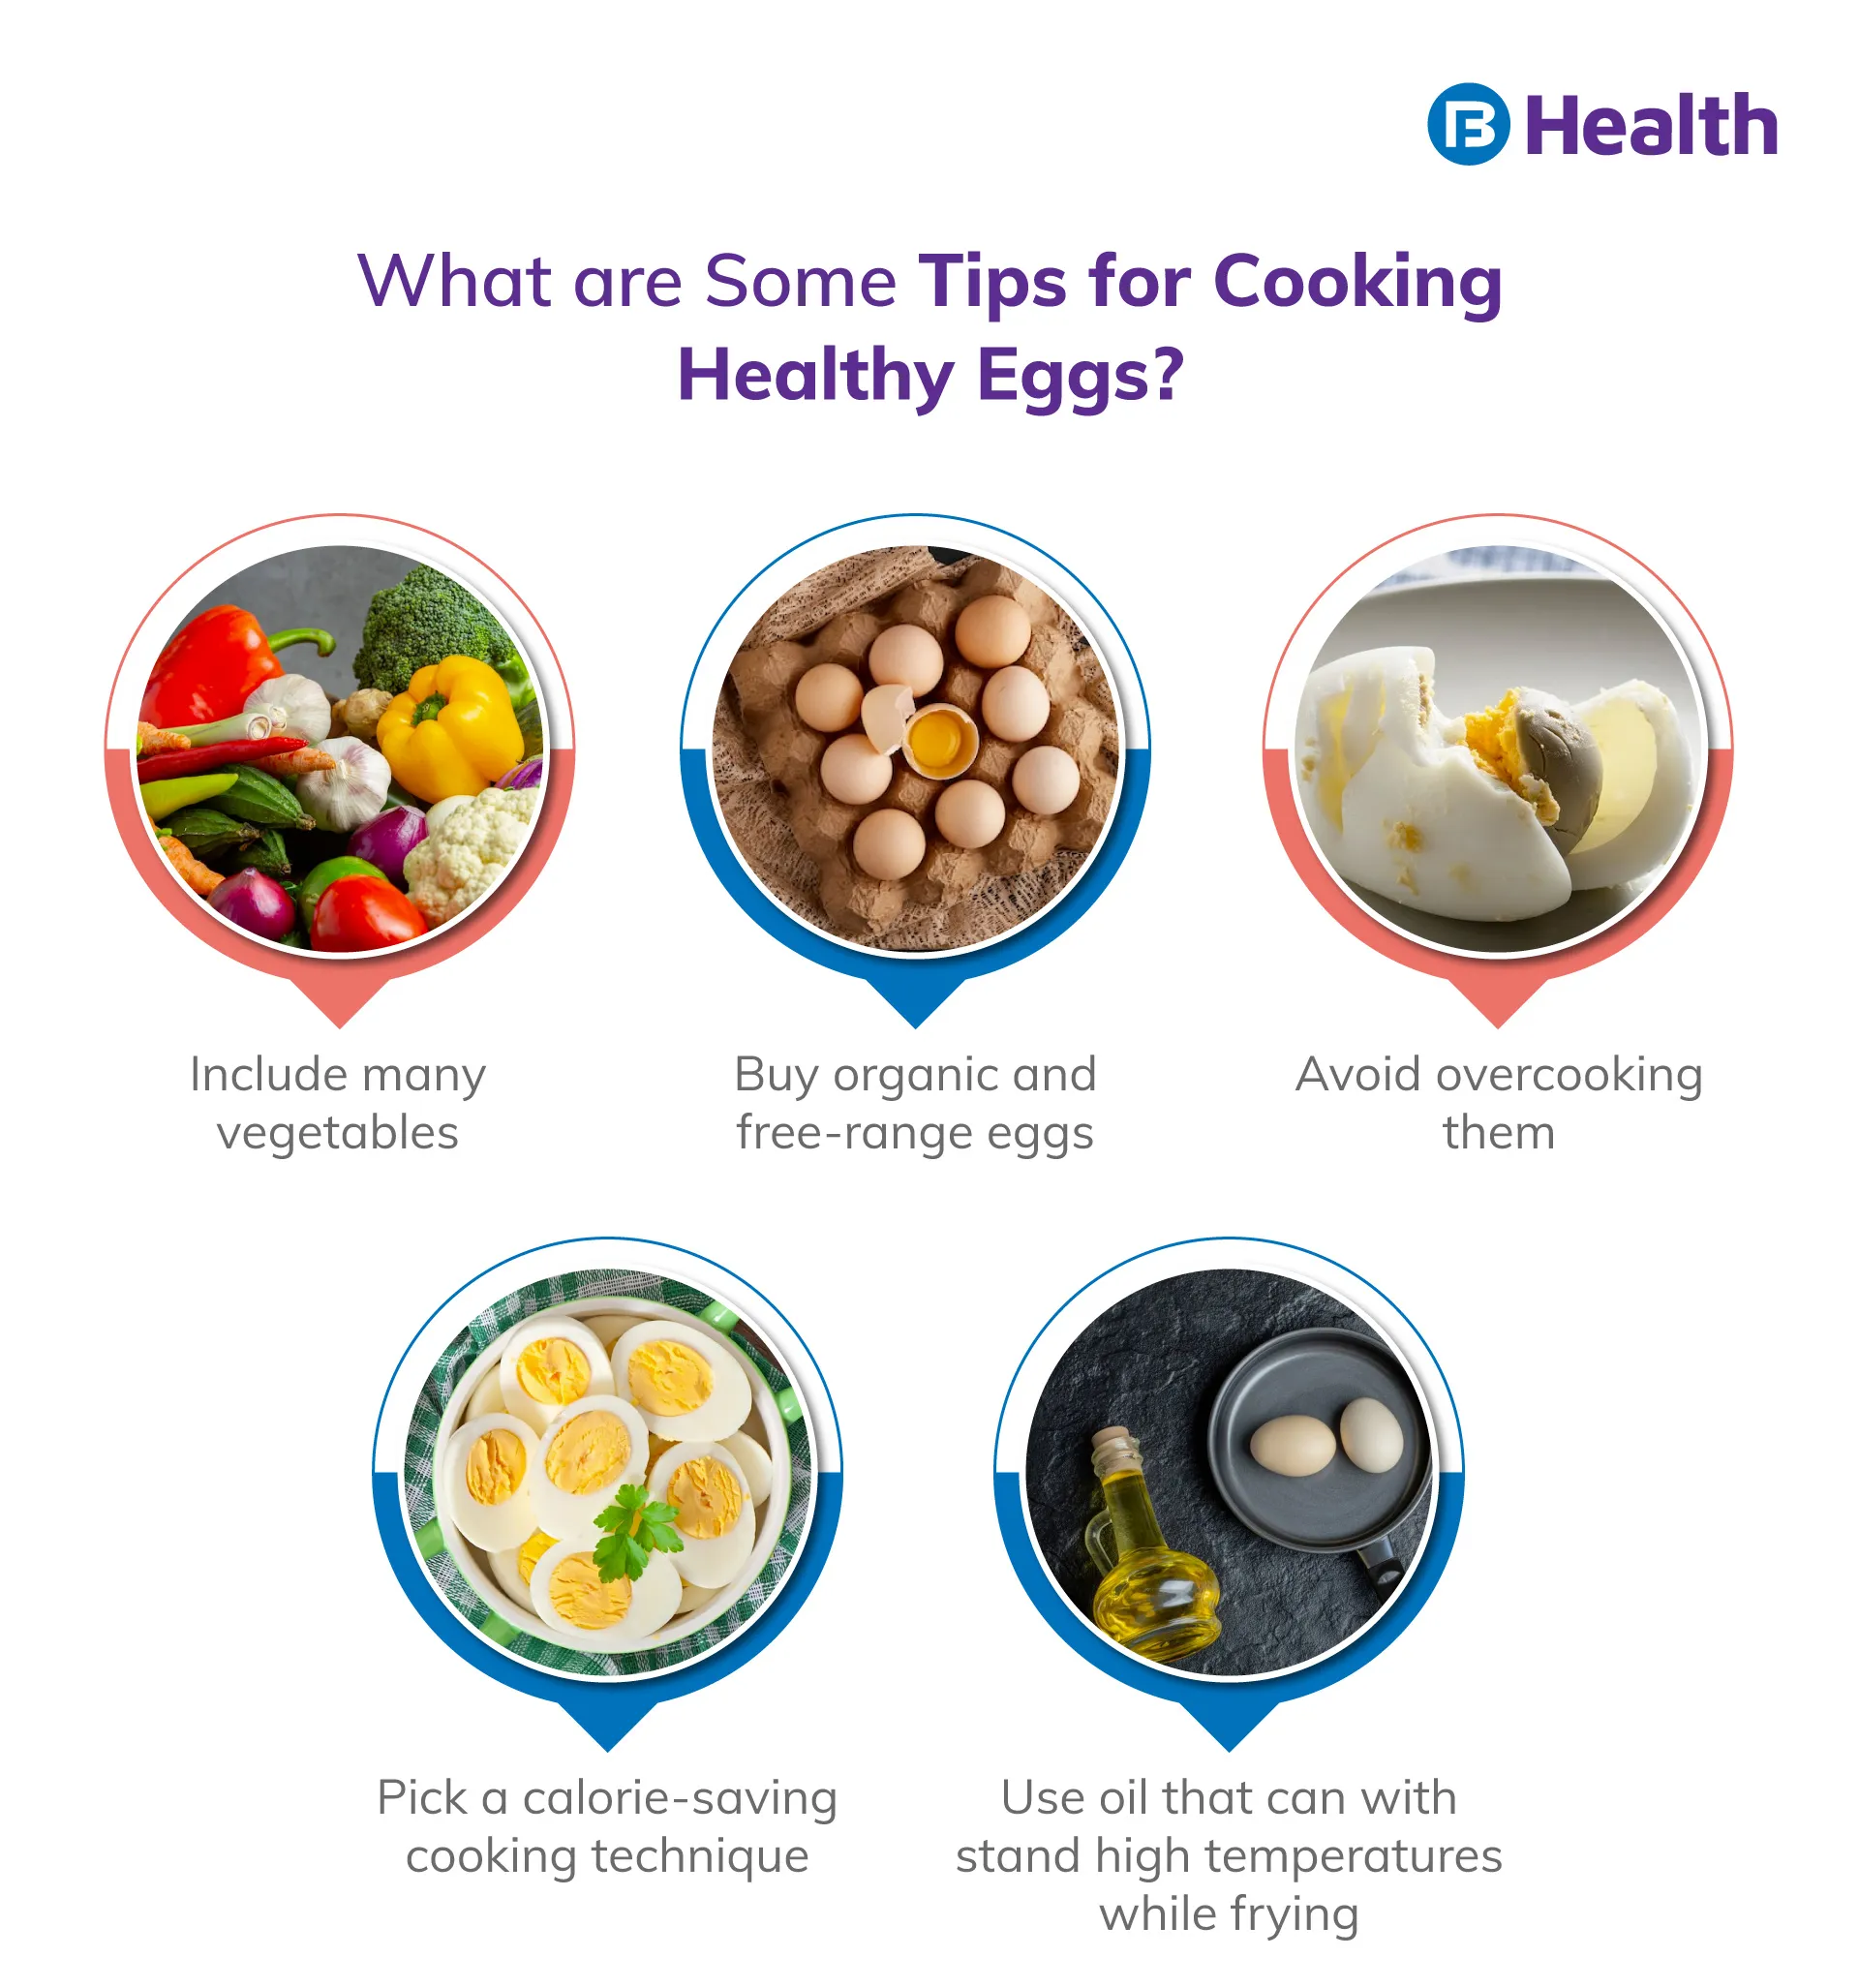 World Egg Day and tips for cooking eggs